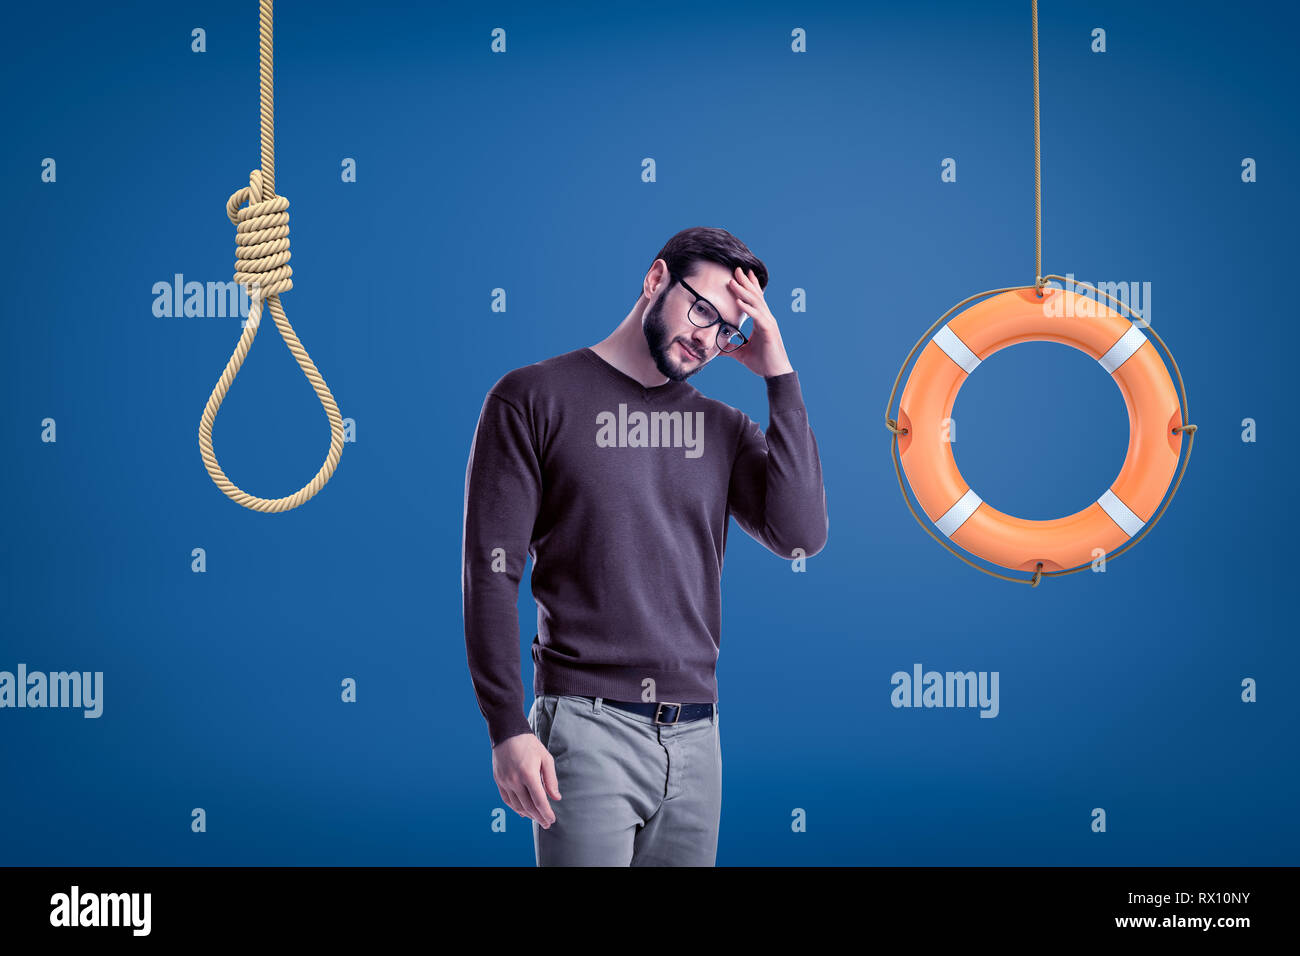 Man in casual outfit standing half-turn with hand on forehead as if choosing between lifebuoy hanging on rope and hangman's noose. Stock Photo